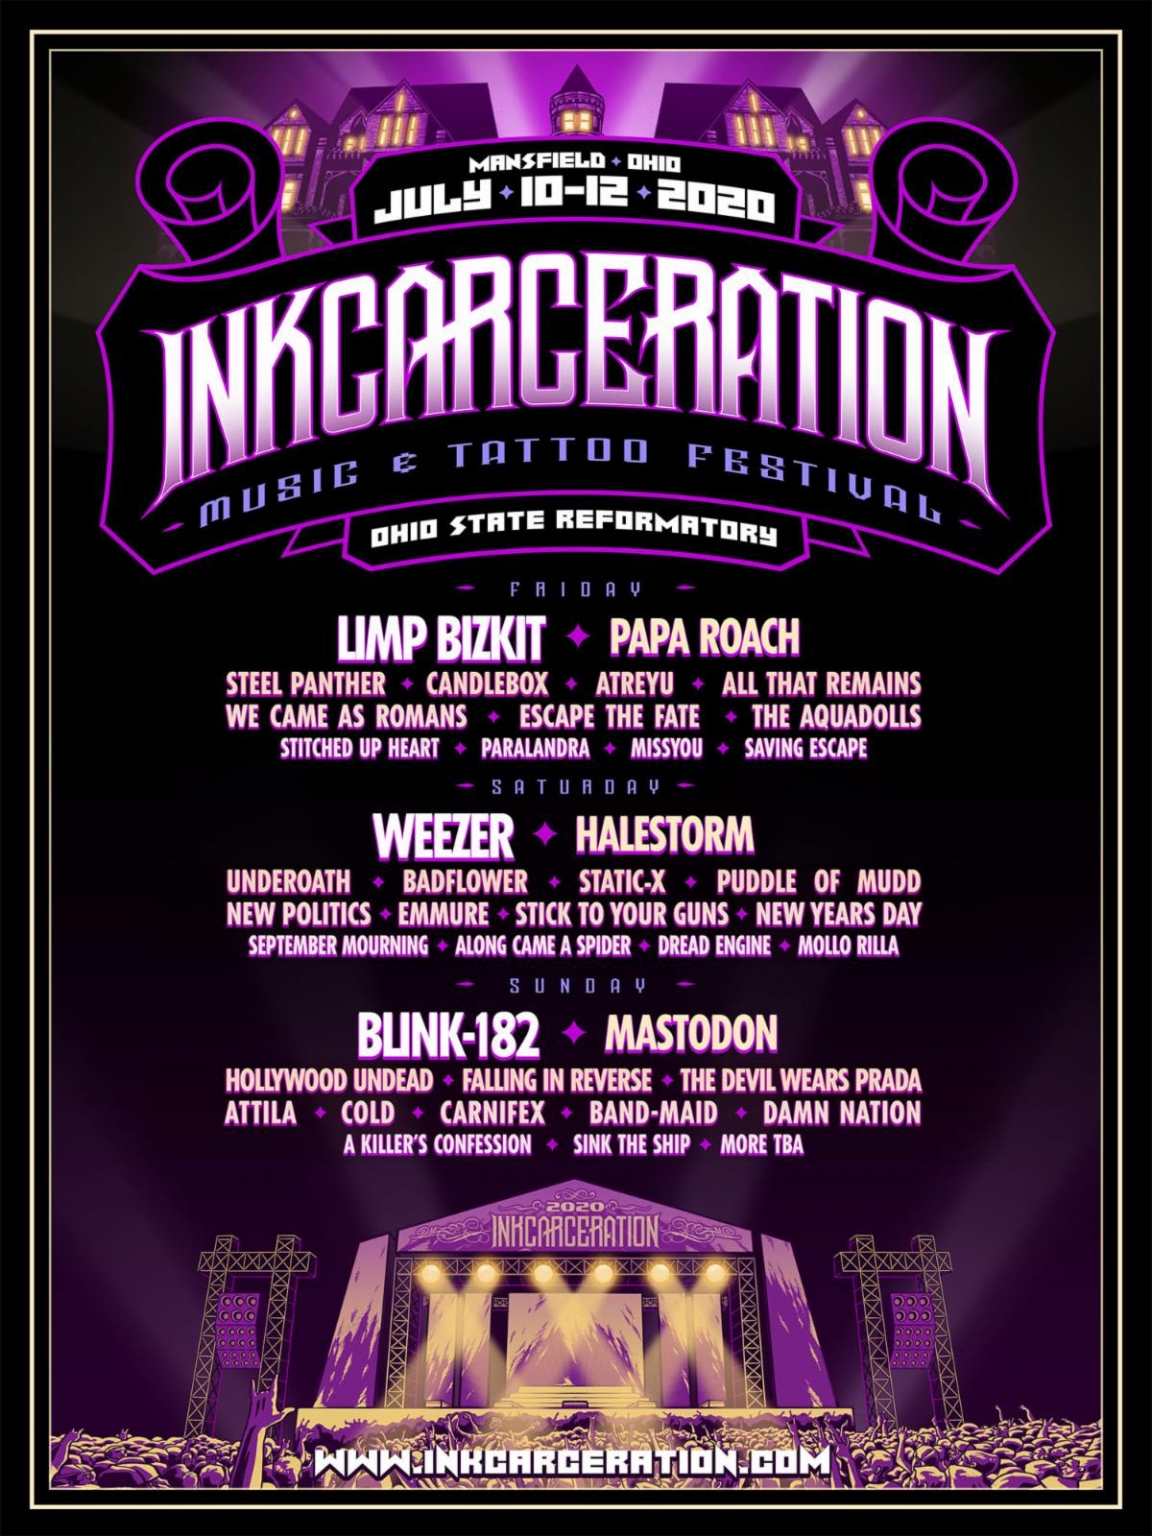 Third Annual INKCARCERATION Music and Tattoo Festival at Historic Ohio